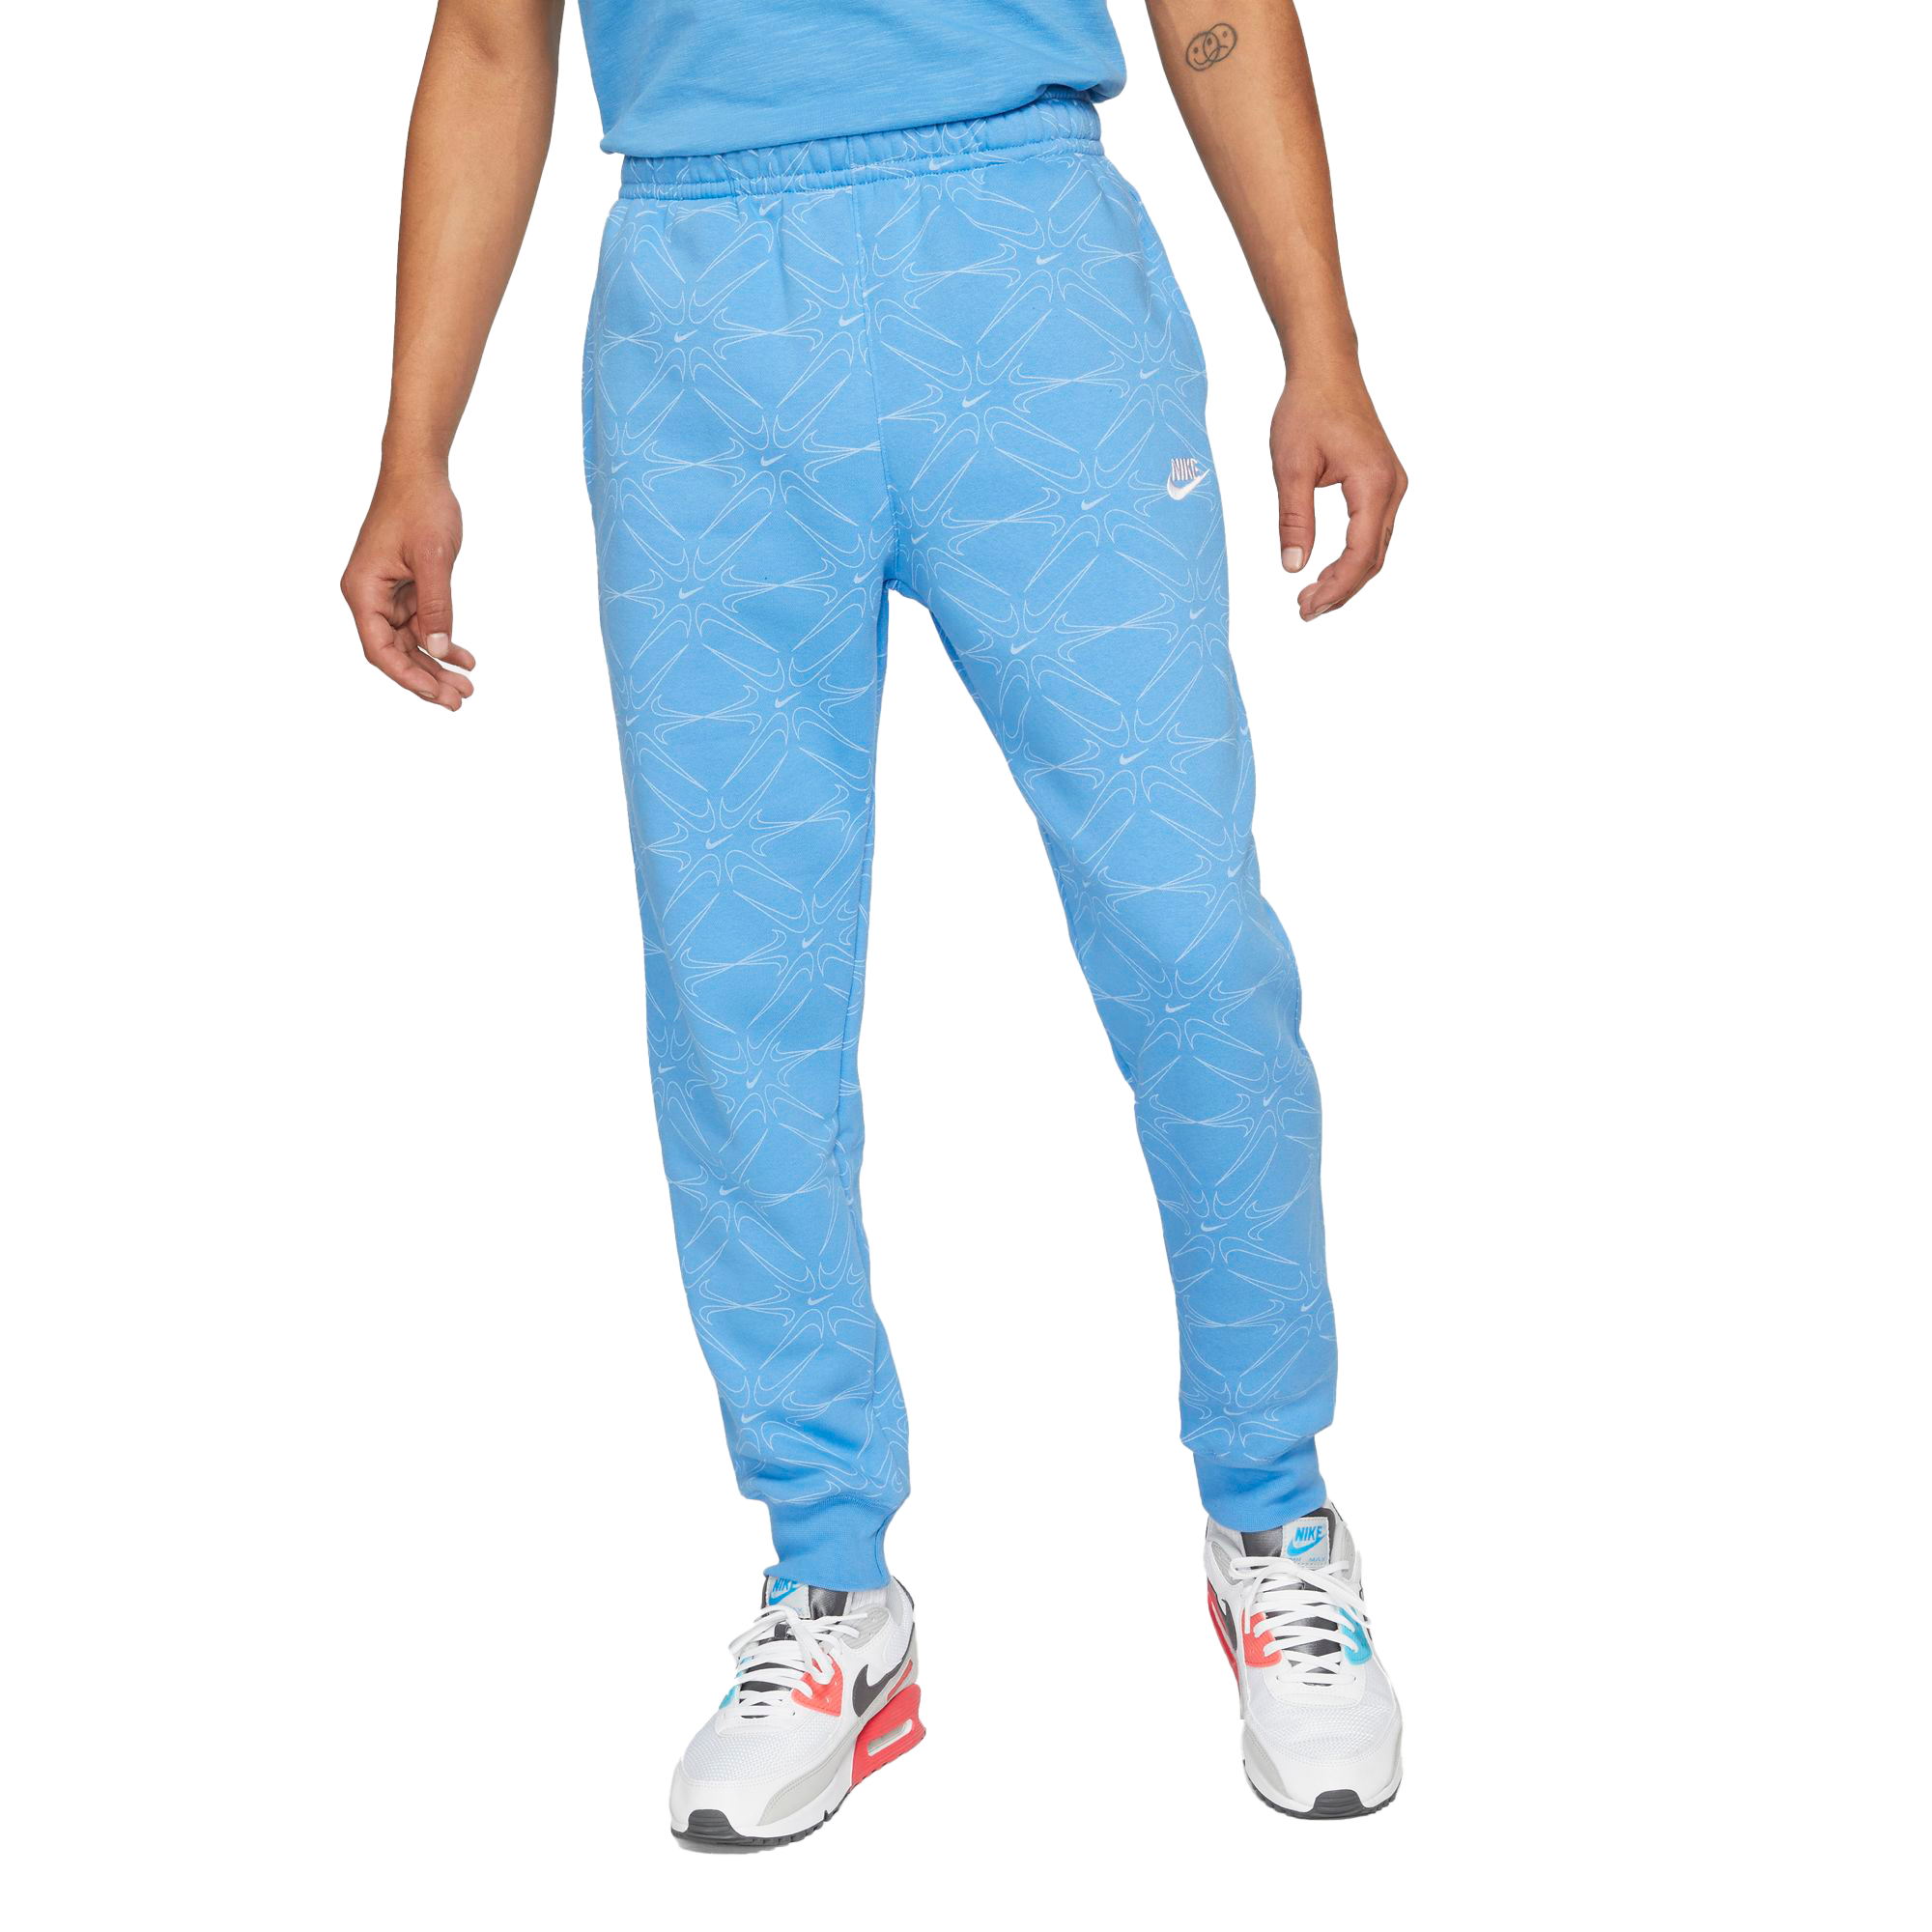 Sky Blue and White ND Joggers set – Not Defeated